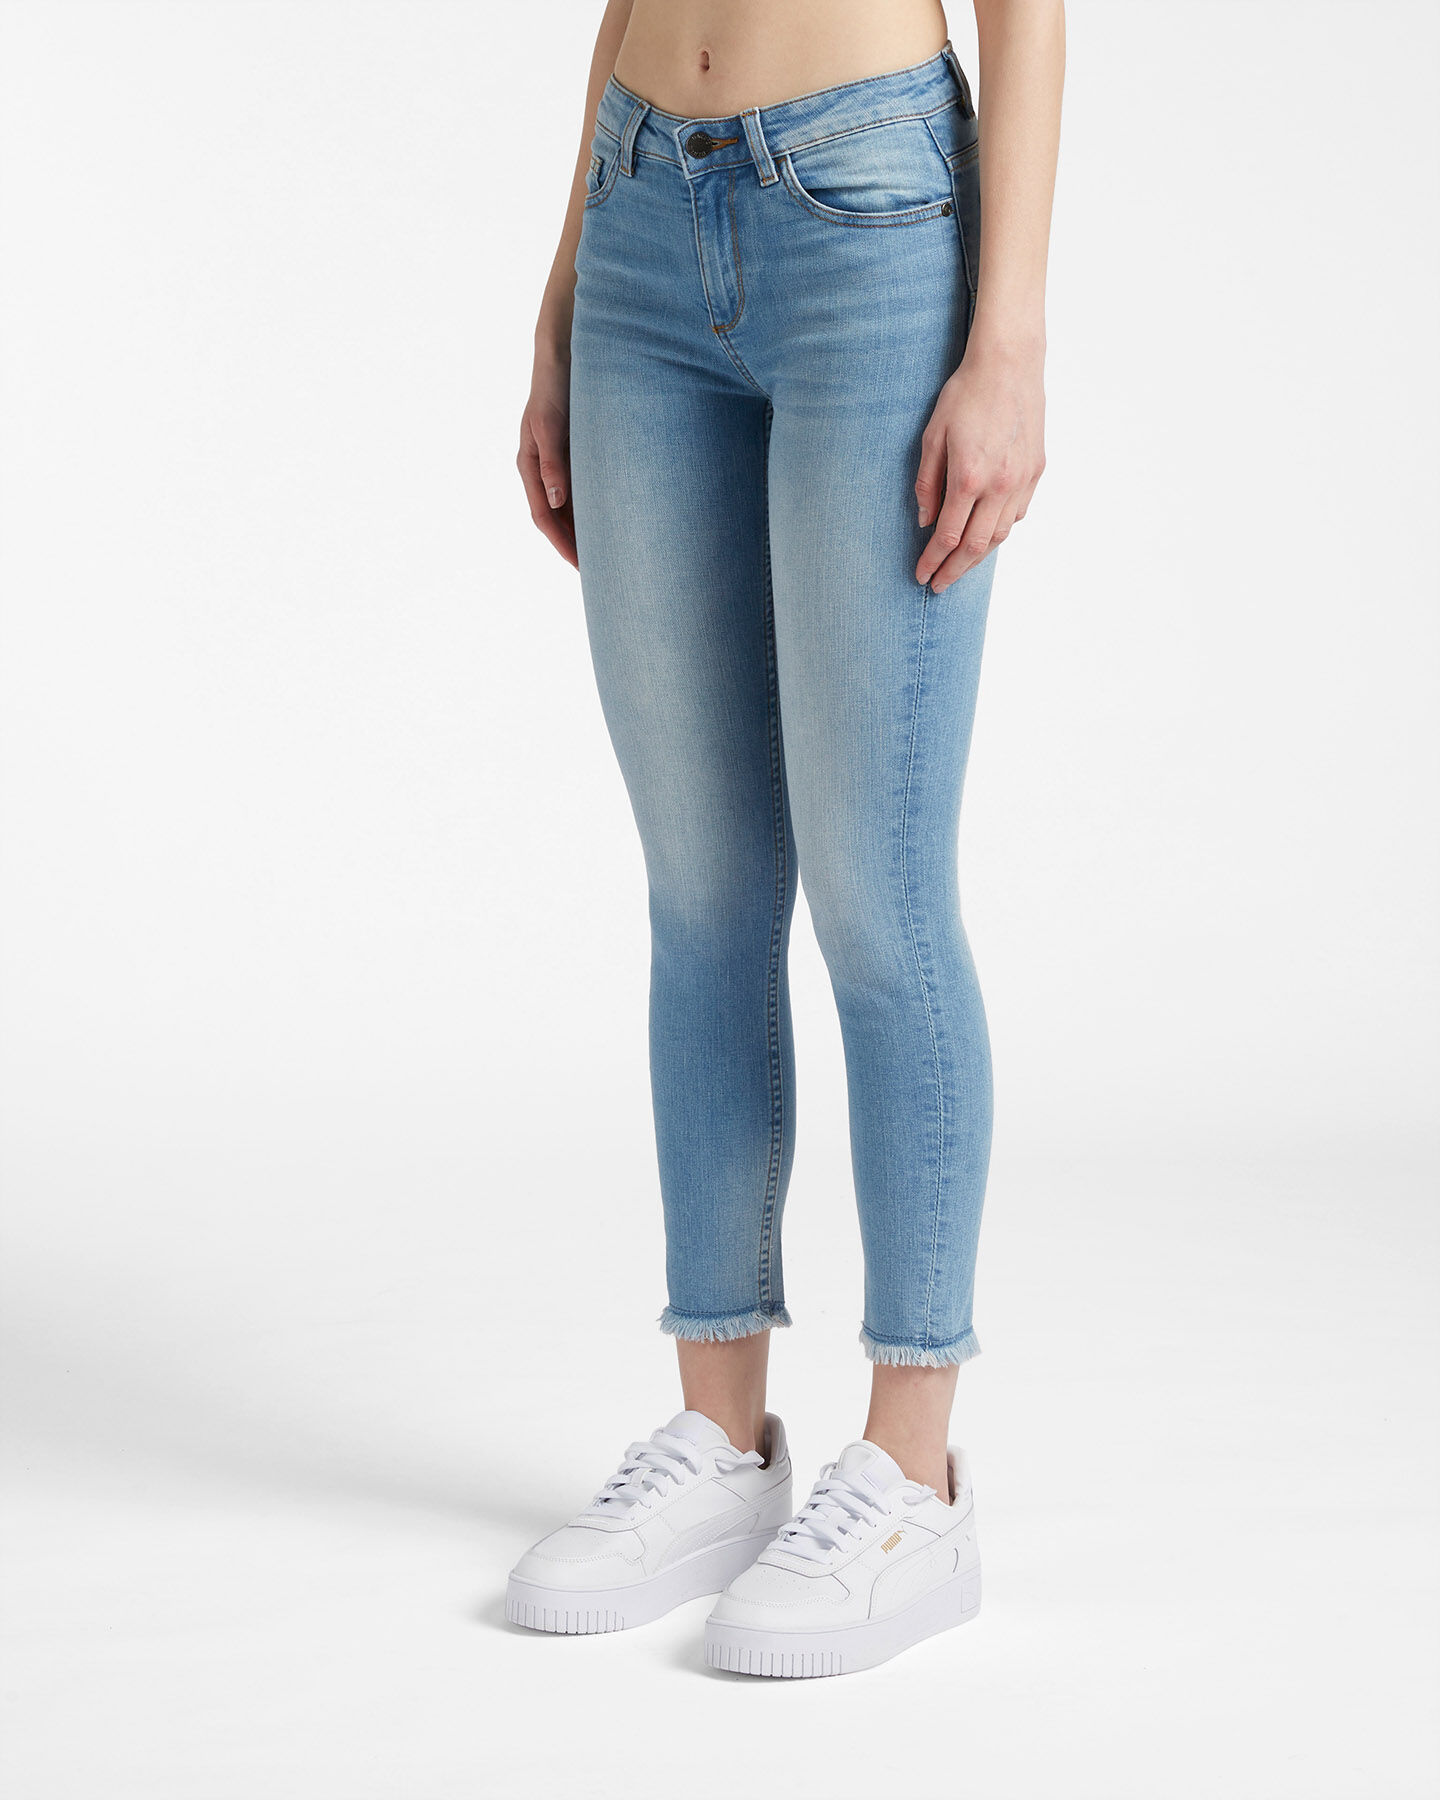  Jeans DACK'S DENIM PROJECT W S4118475|LD|40 scatto 2